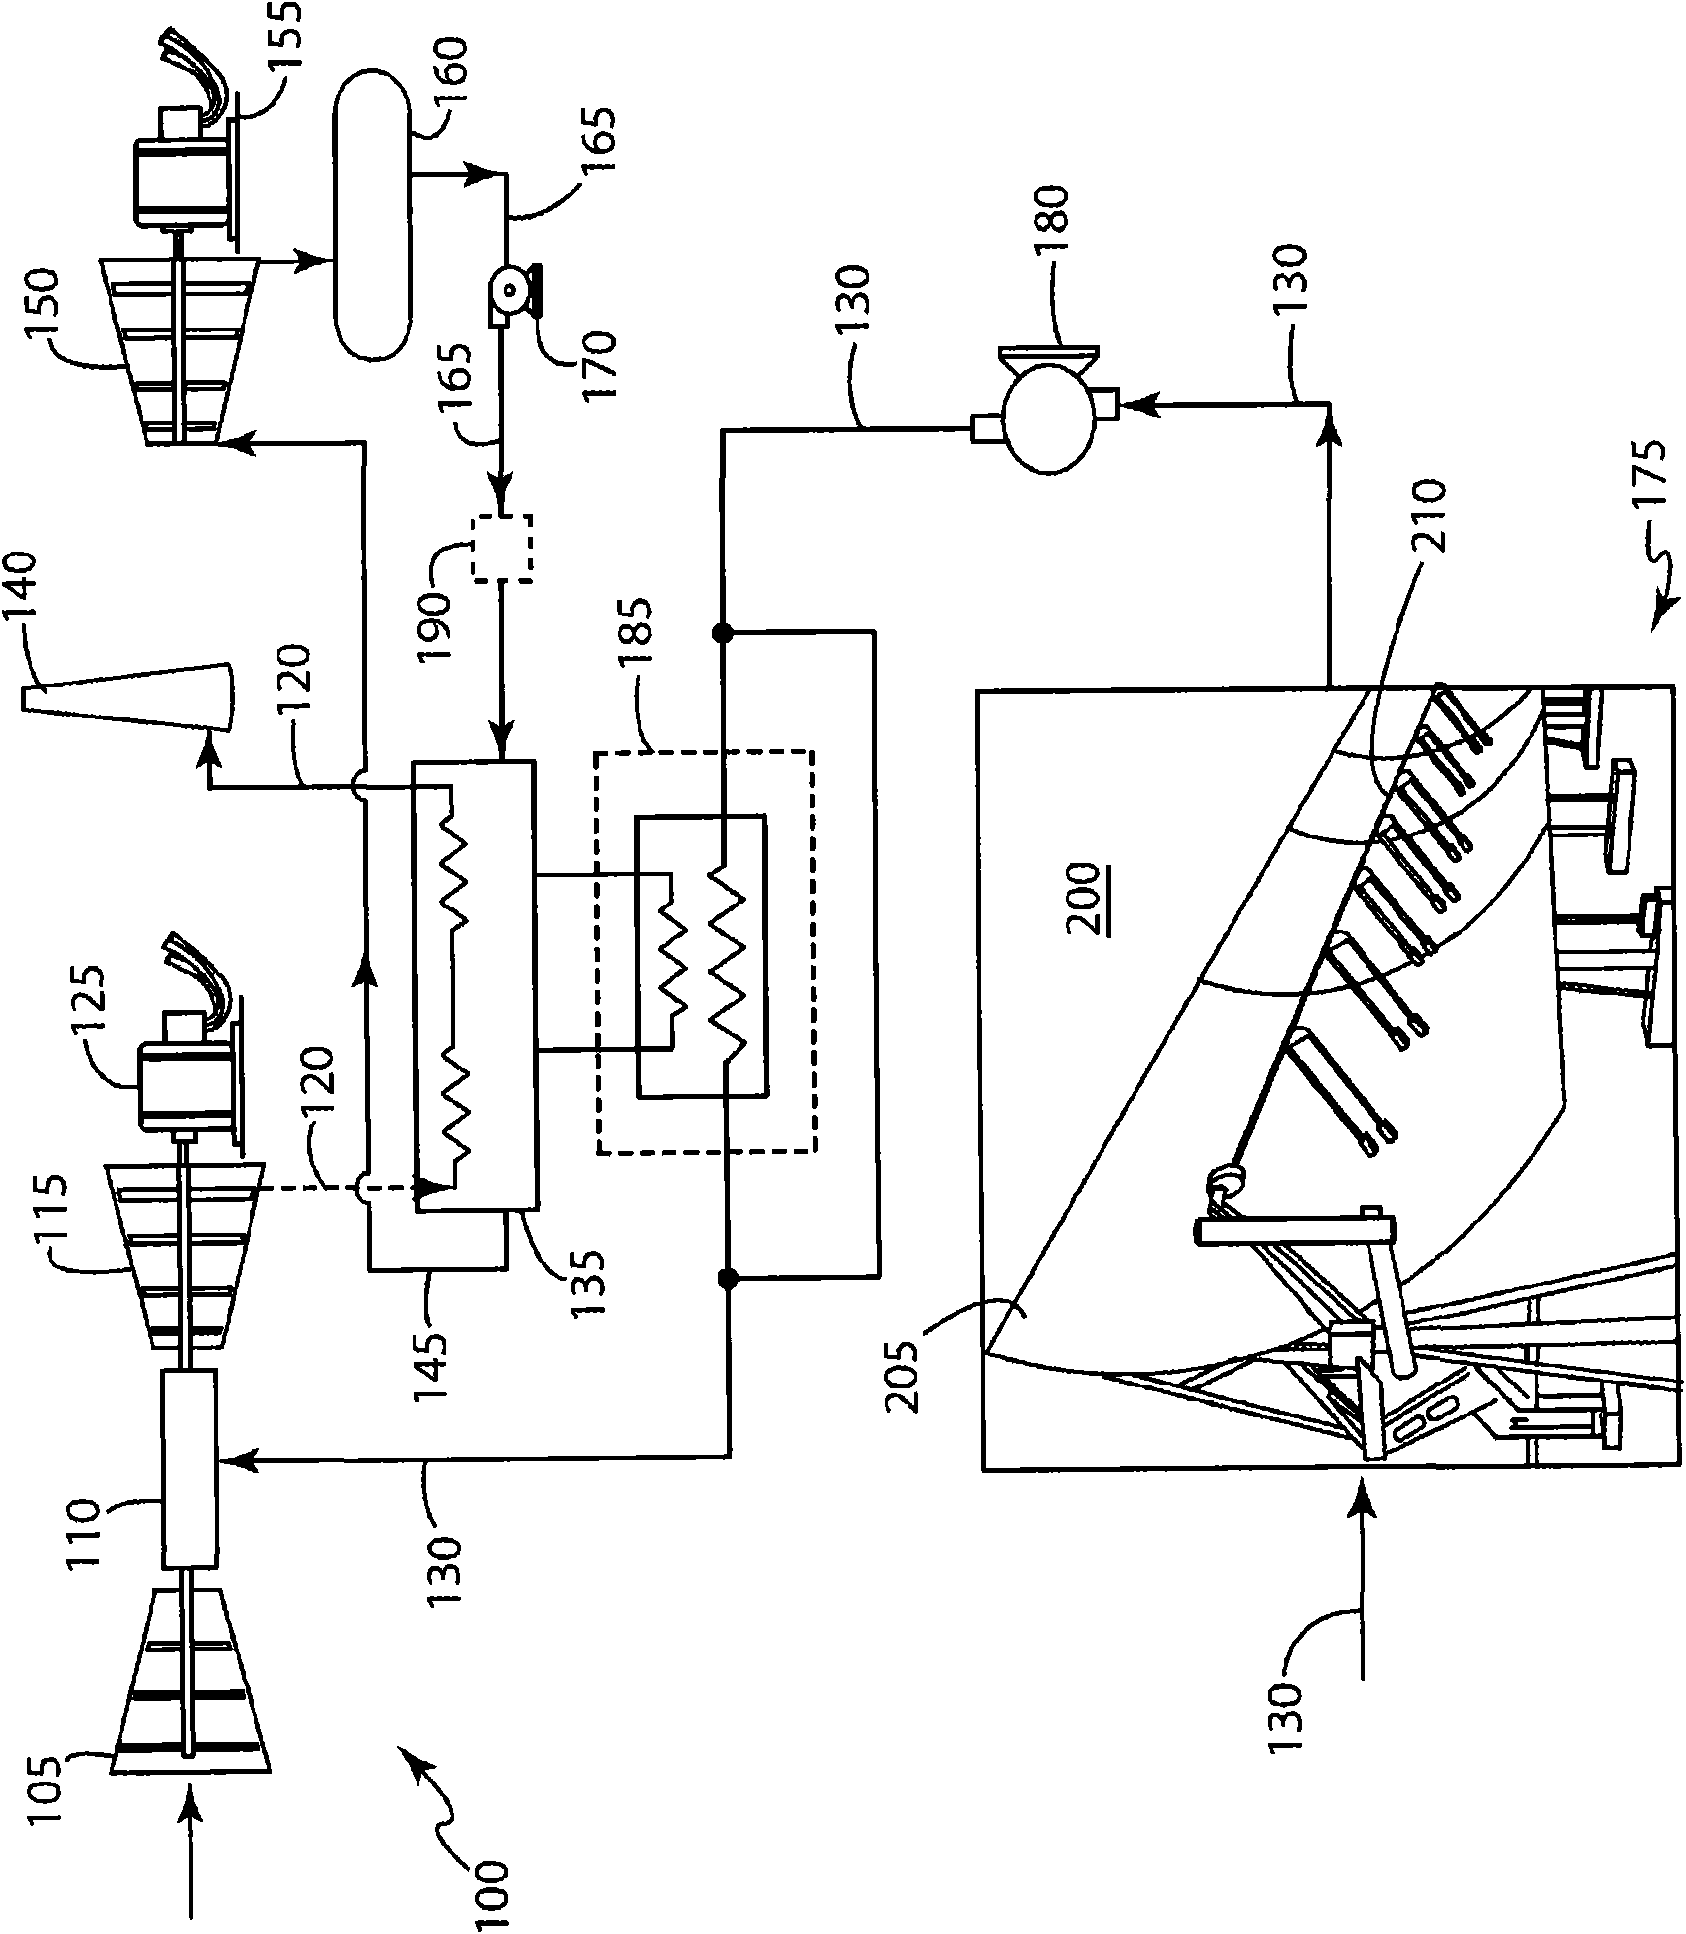 A system and method for heating a fuel using a solar heating system